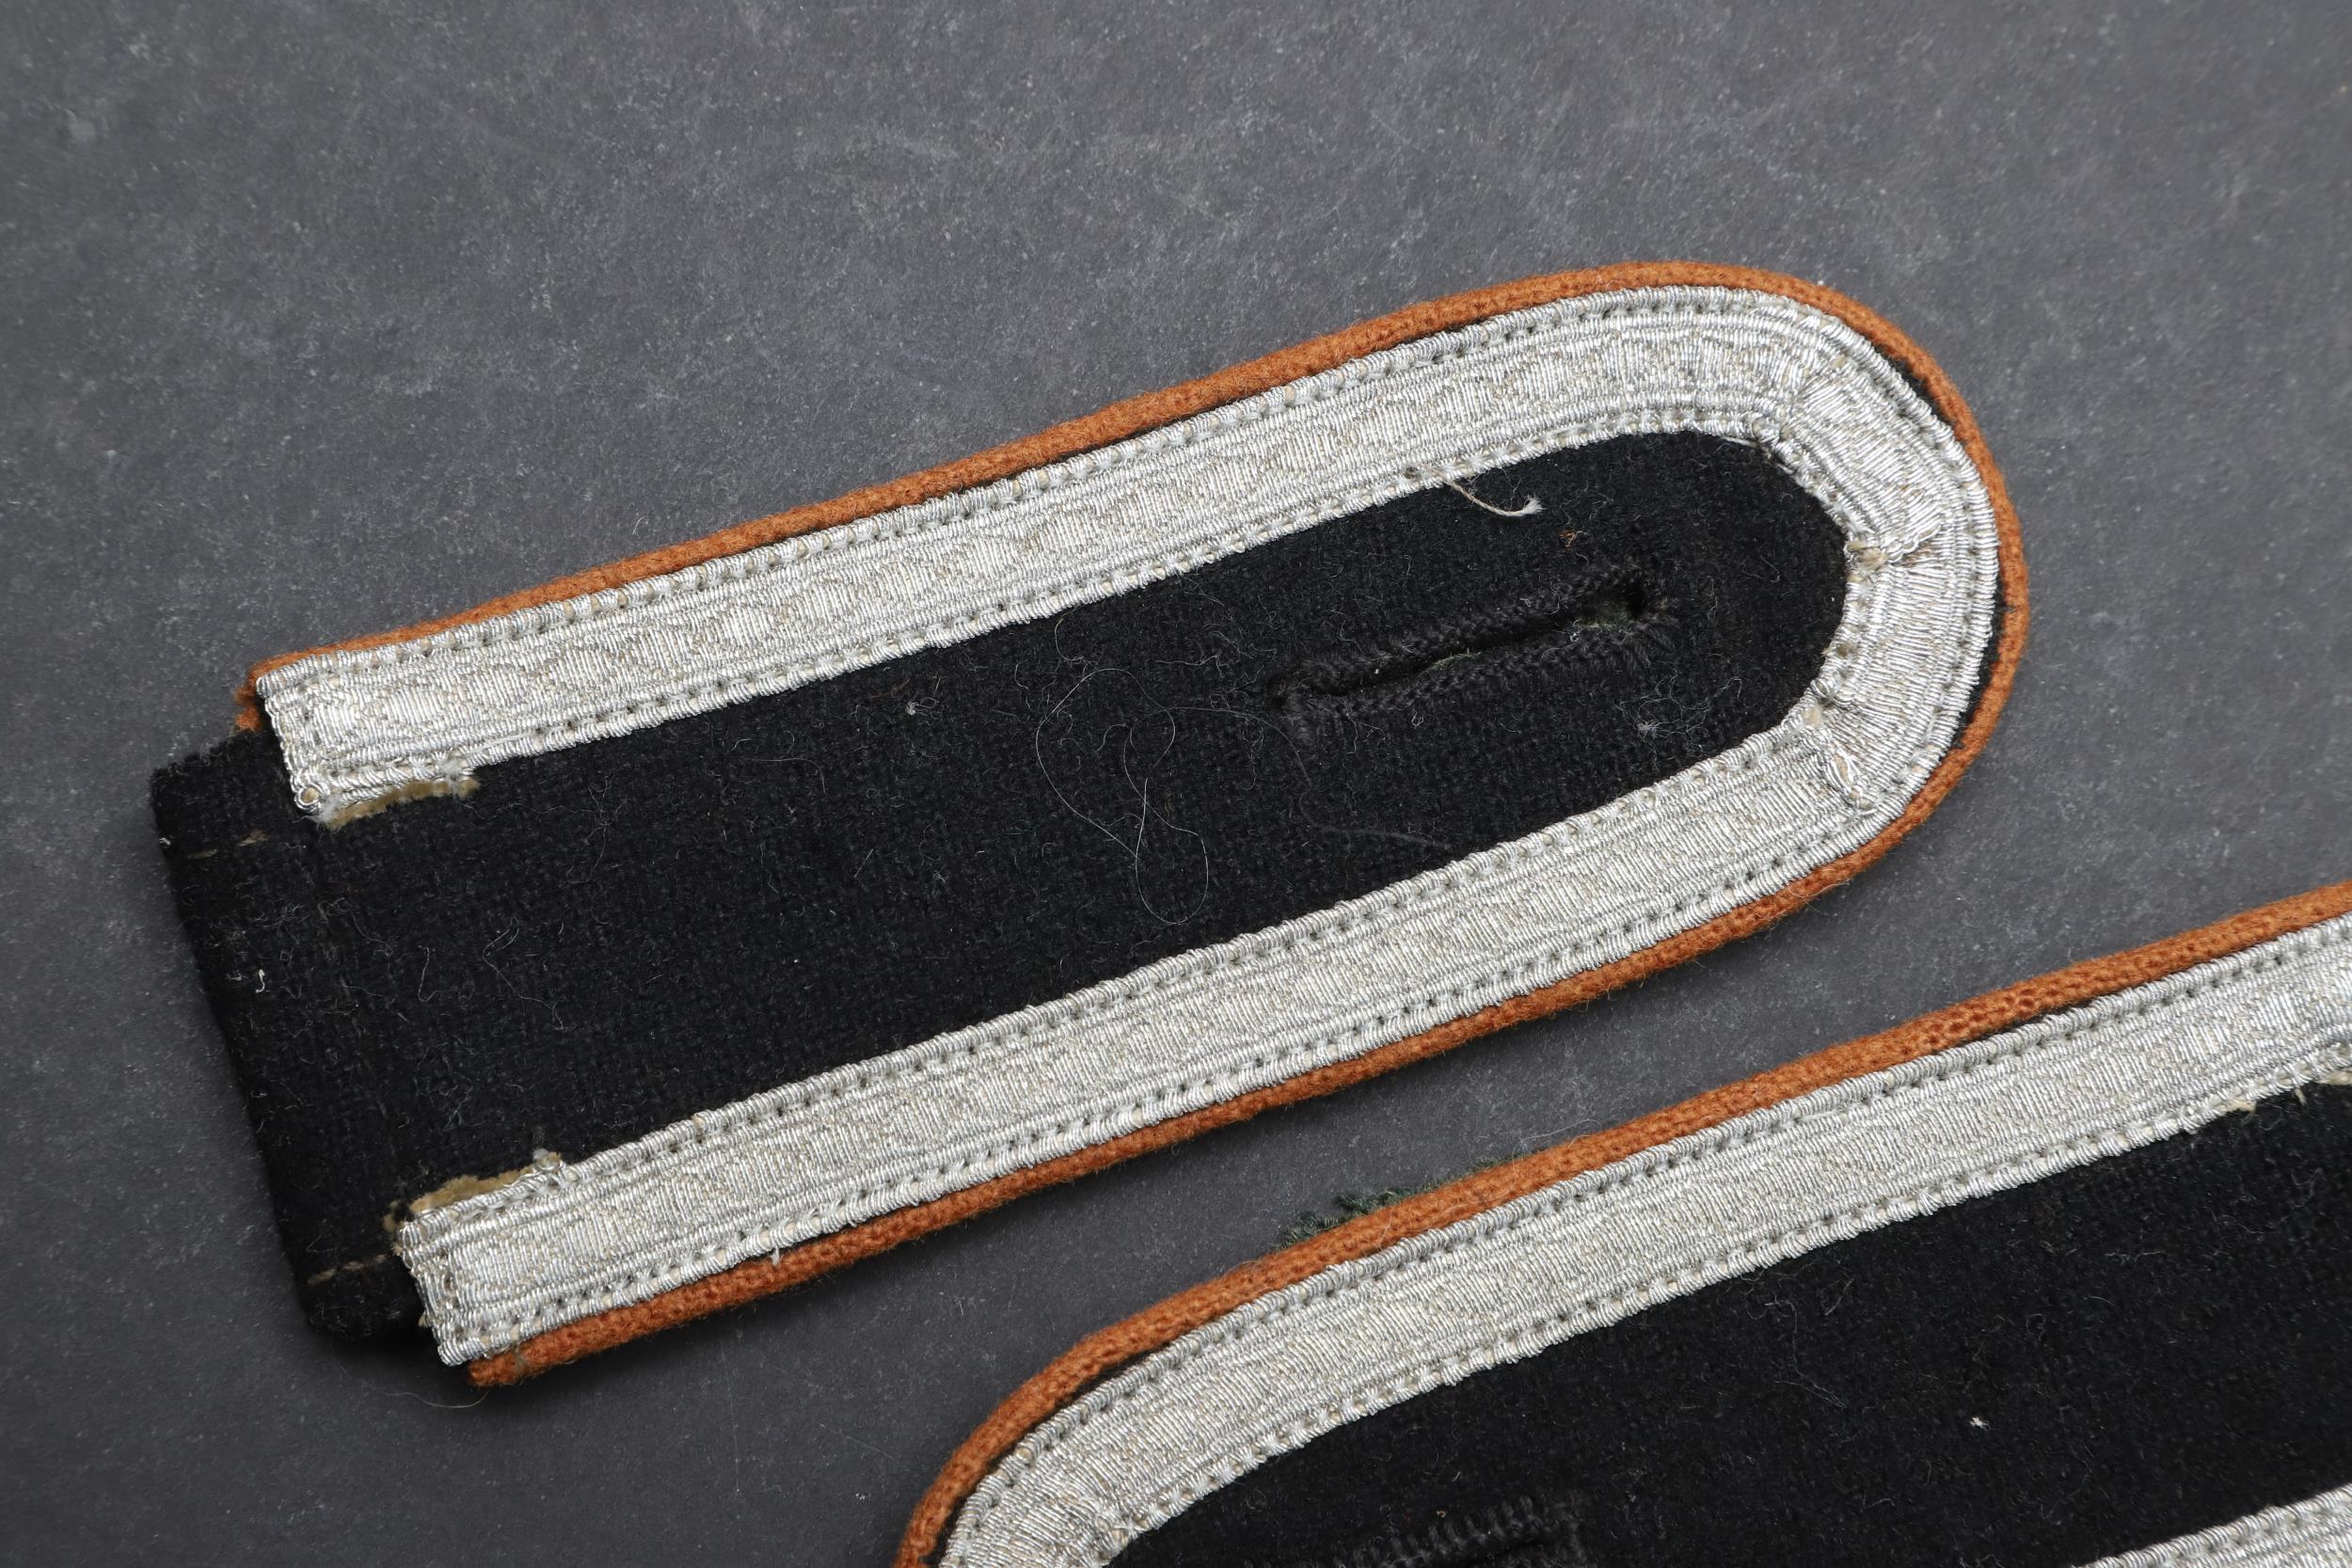 A PAIR OF SECOND WORLD WAR GERMAN WAFFEN-SS NCO'S SHOULDER STRAPS. - Image 2 of 4